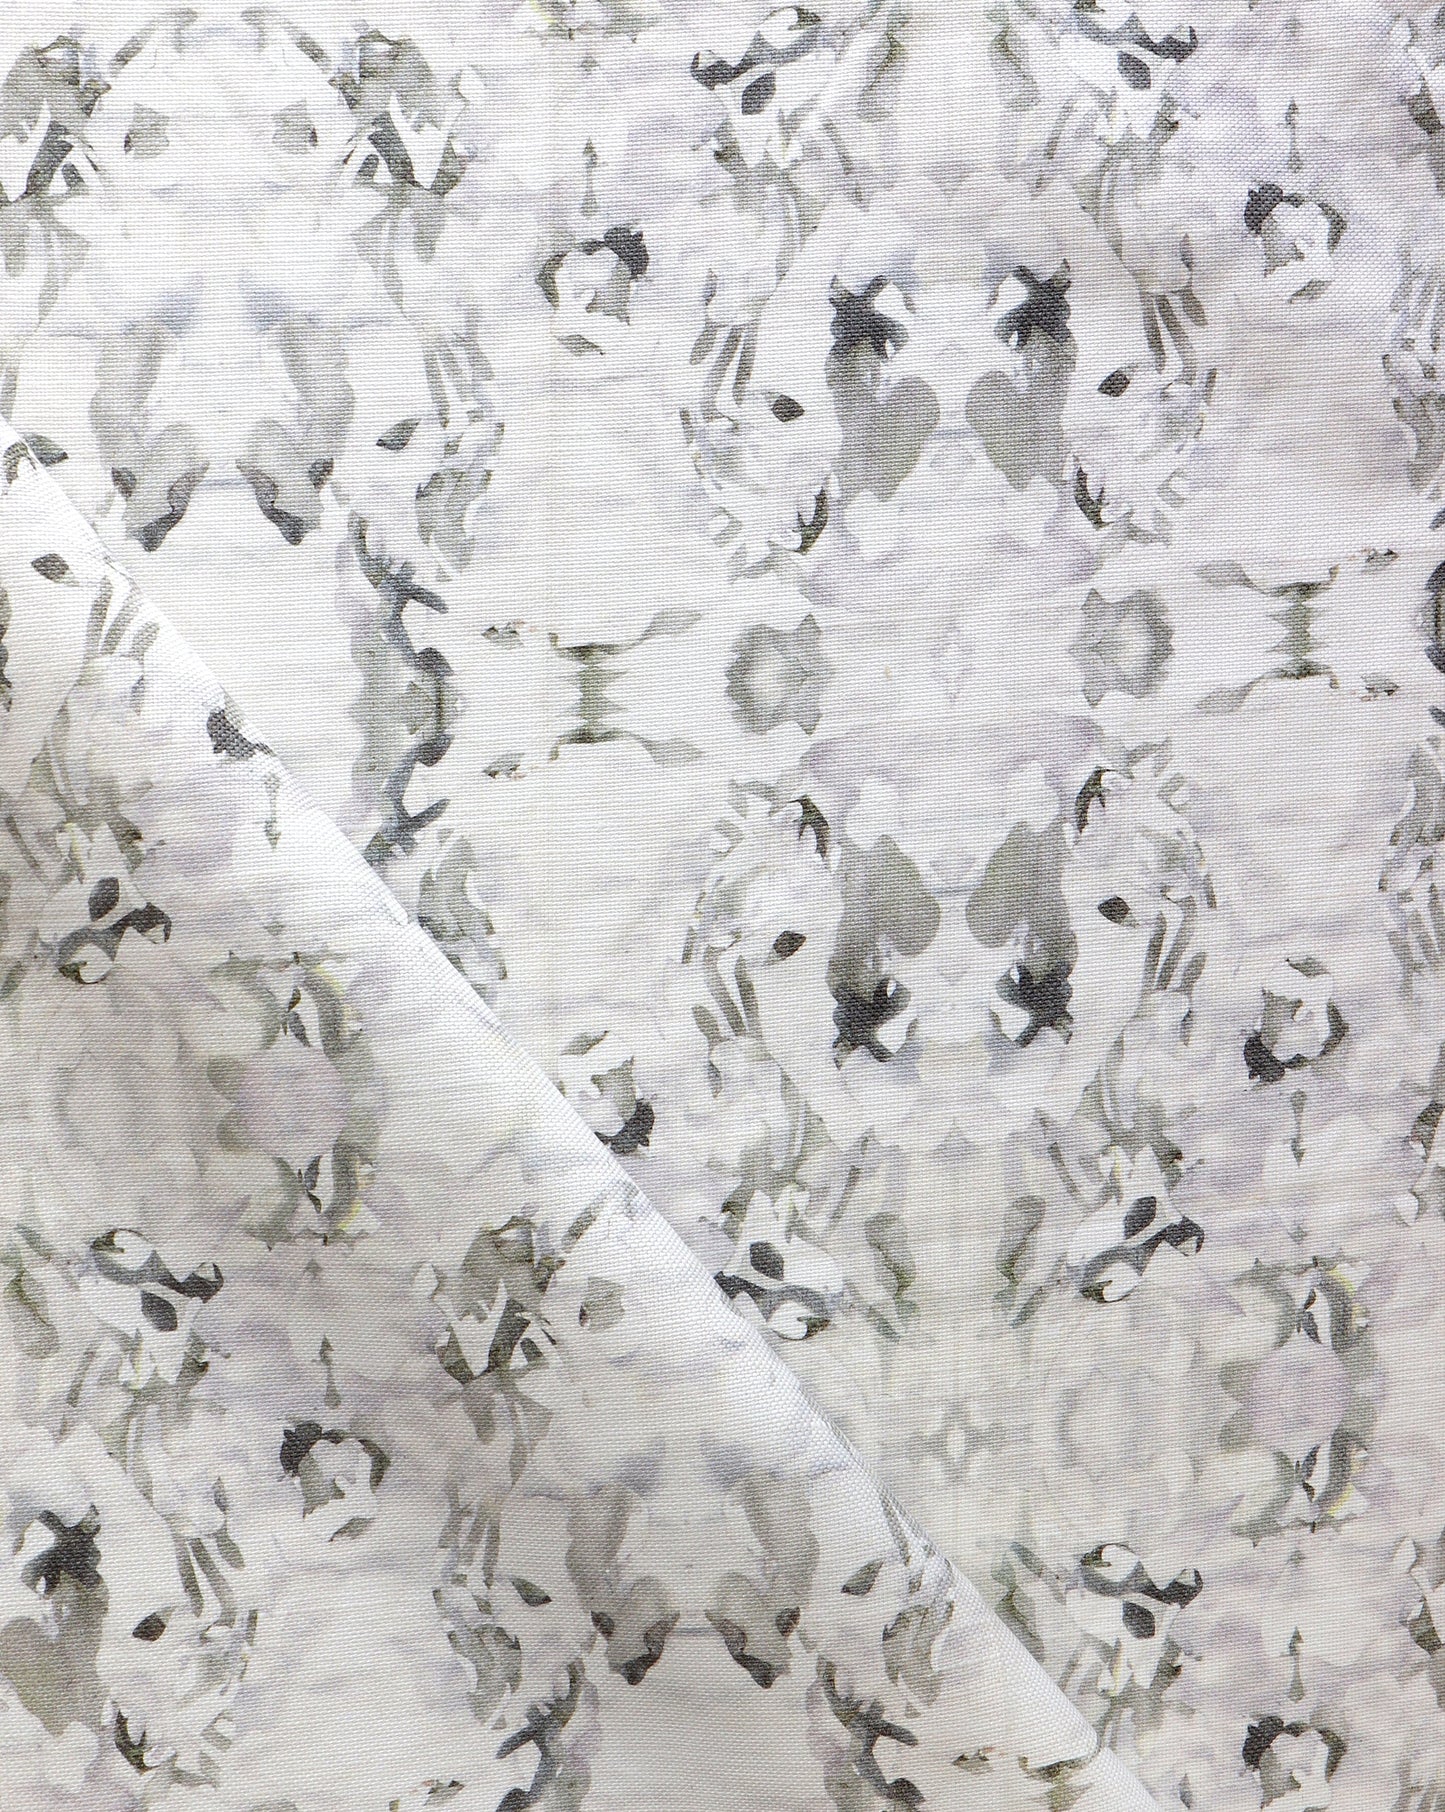 A white and gray Huerfano Fabric||Sol with a Presidio Collection floral pattern.